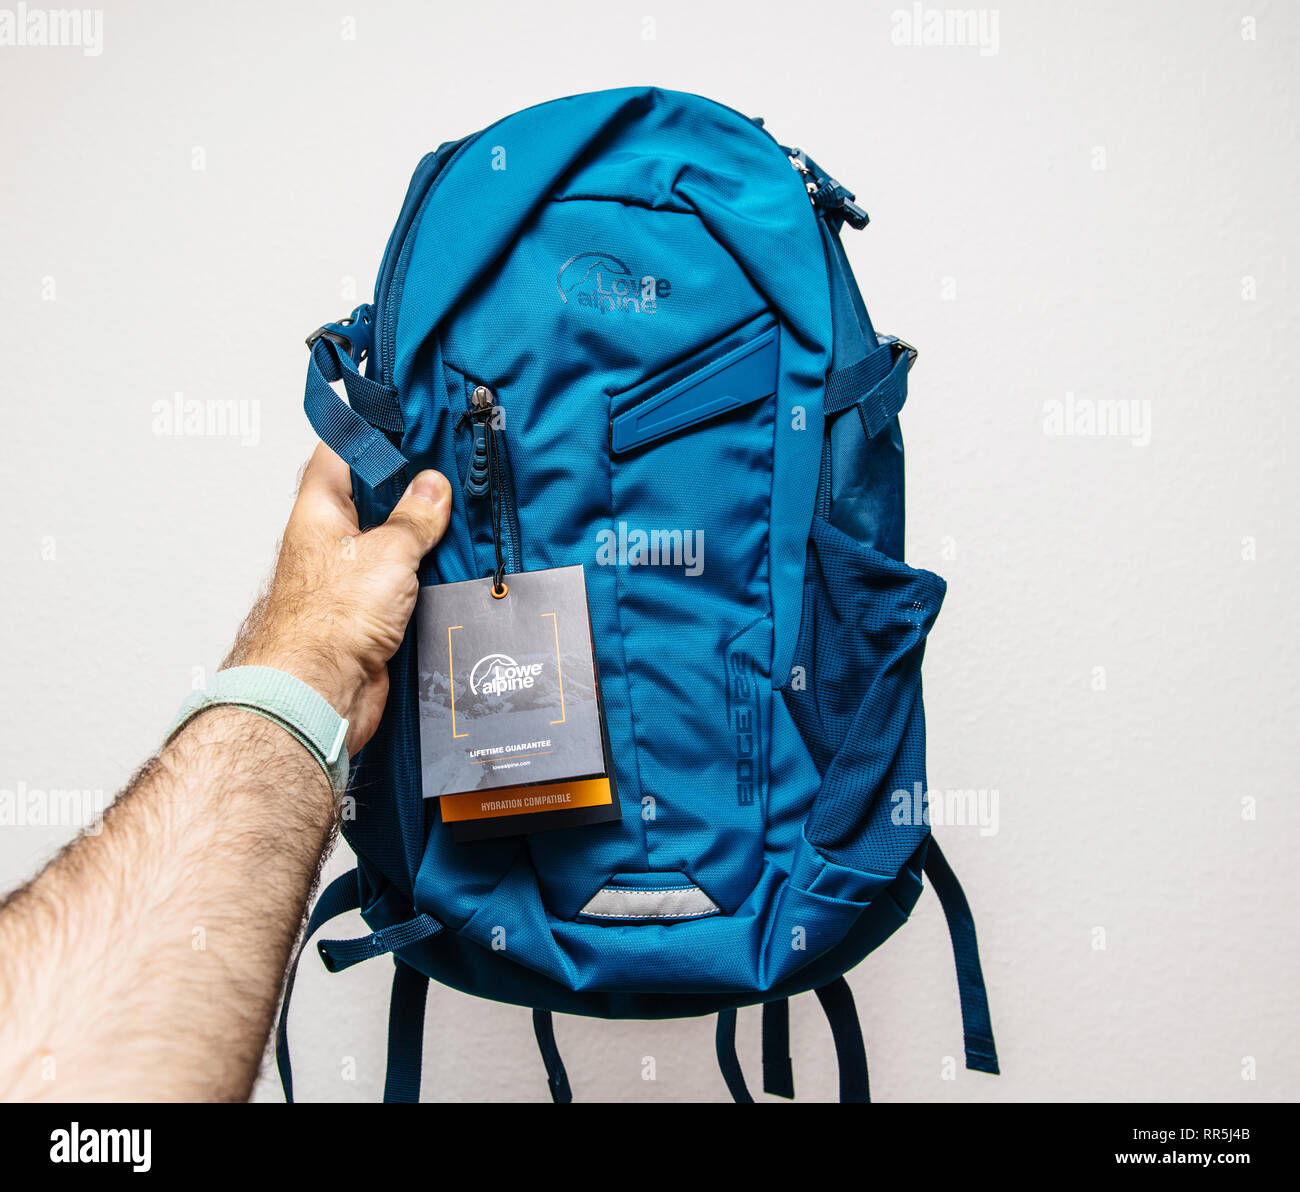 Paris, France - May 30, 2018: Male hand demonstrating against white  background new blue backpack made by Lowe Alpine with Lifetime Guarantee  tag Stock Photo - Alamy